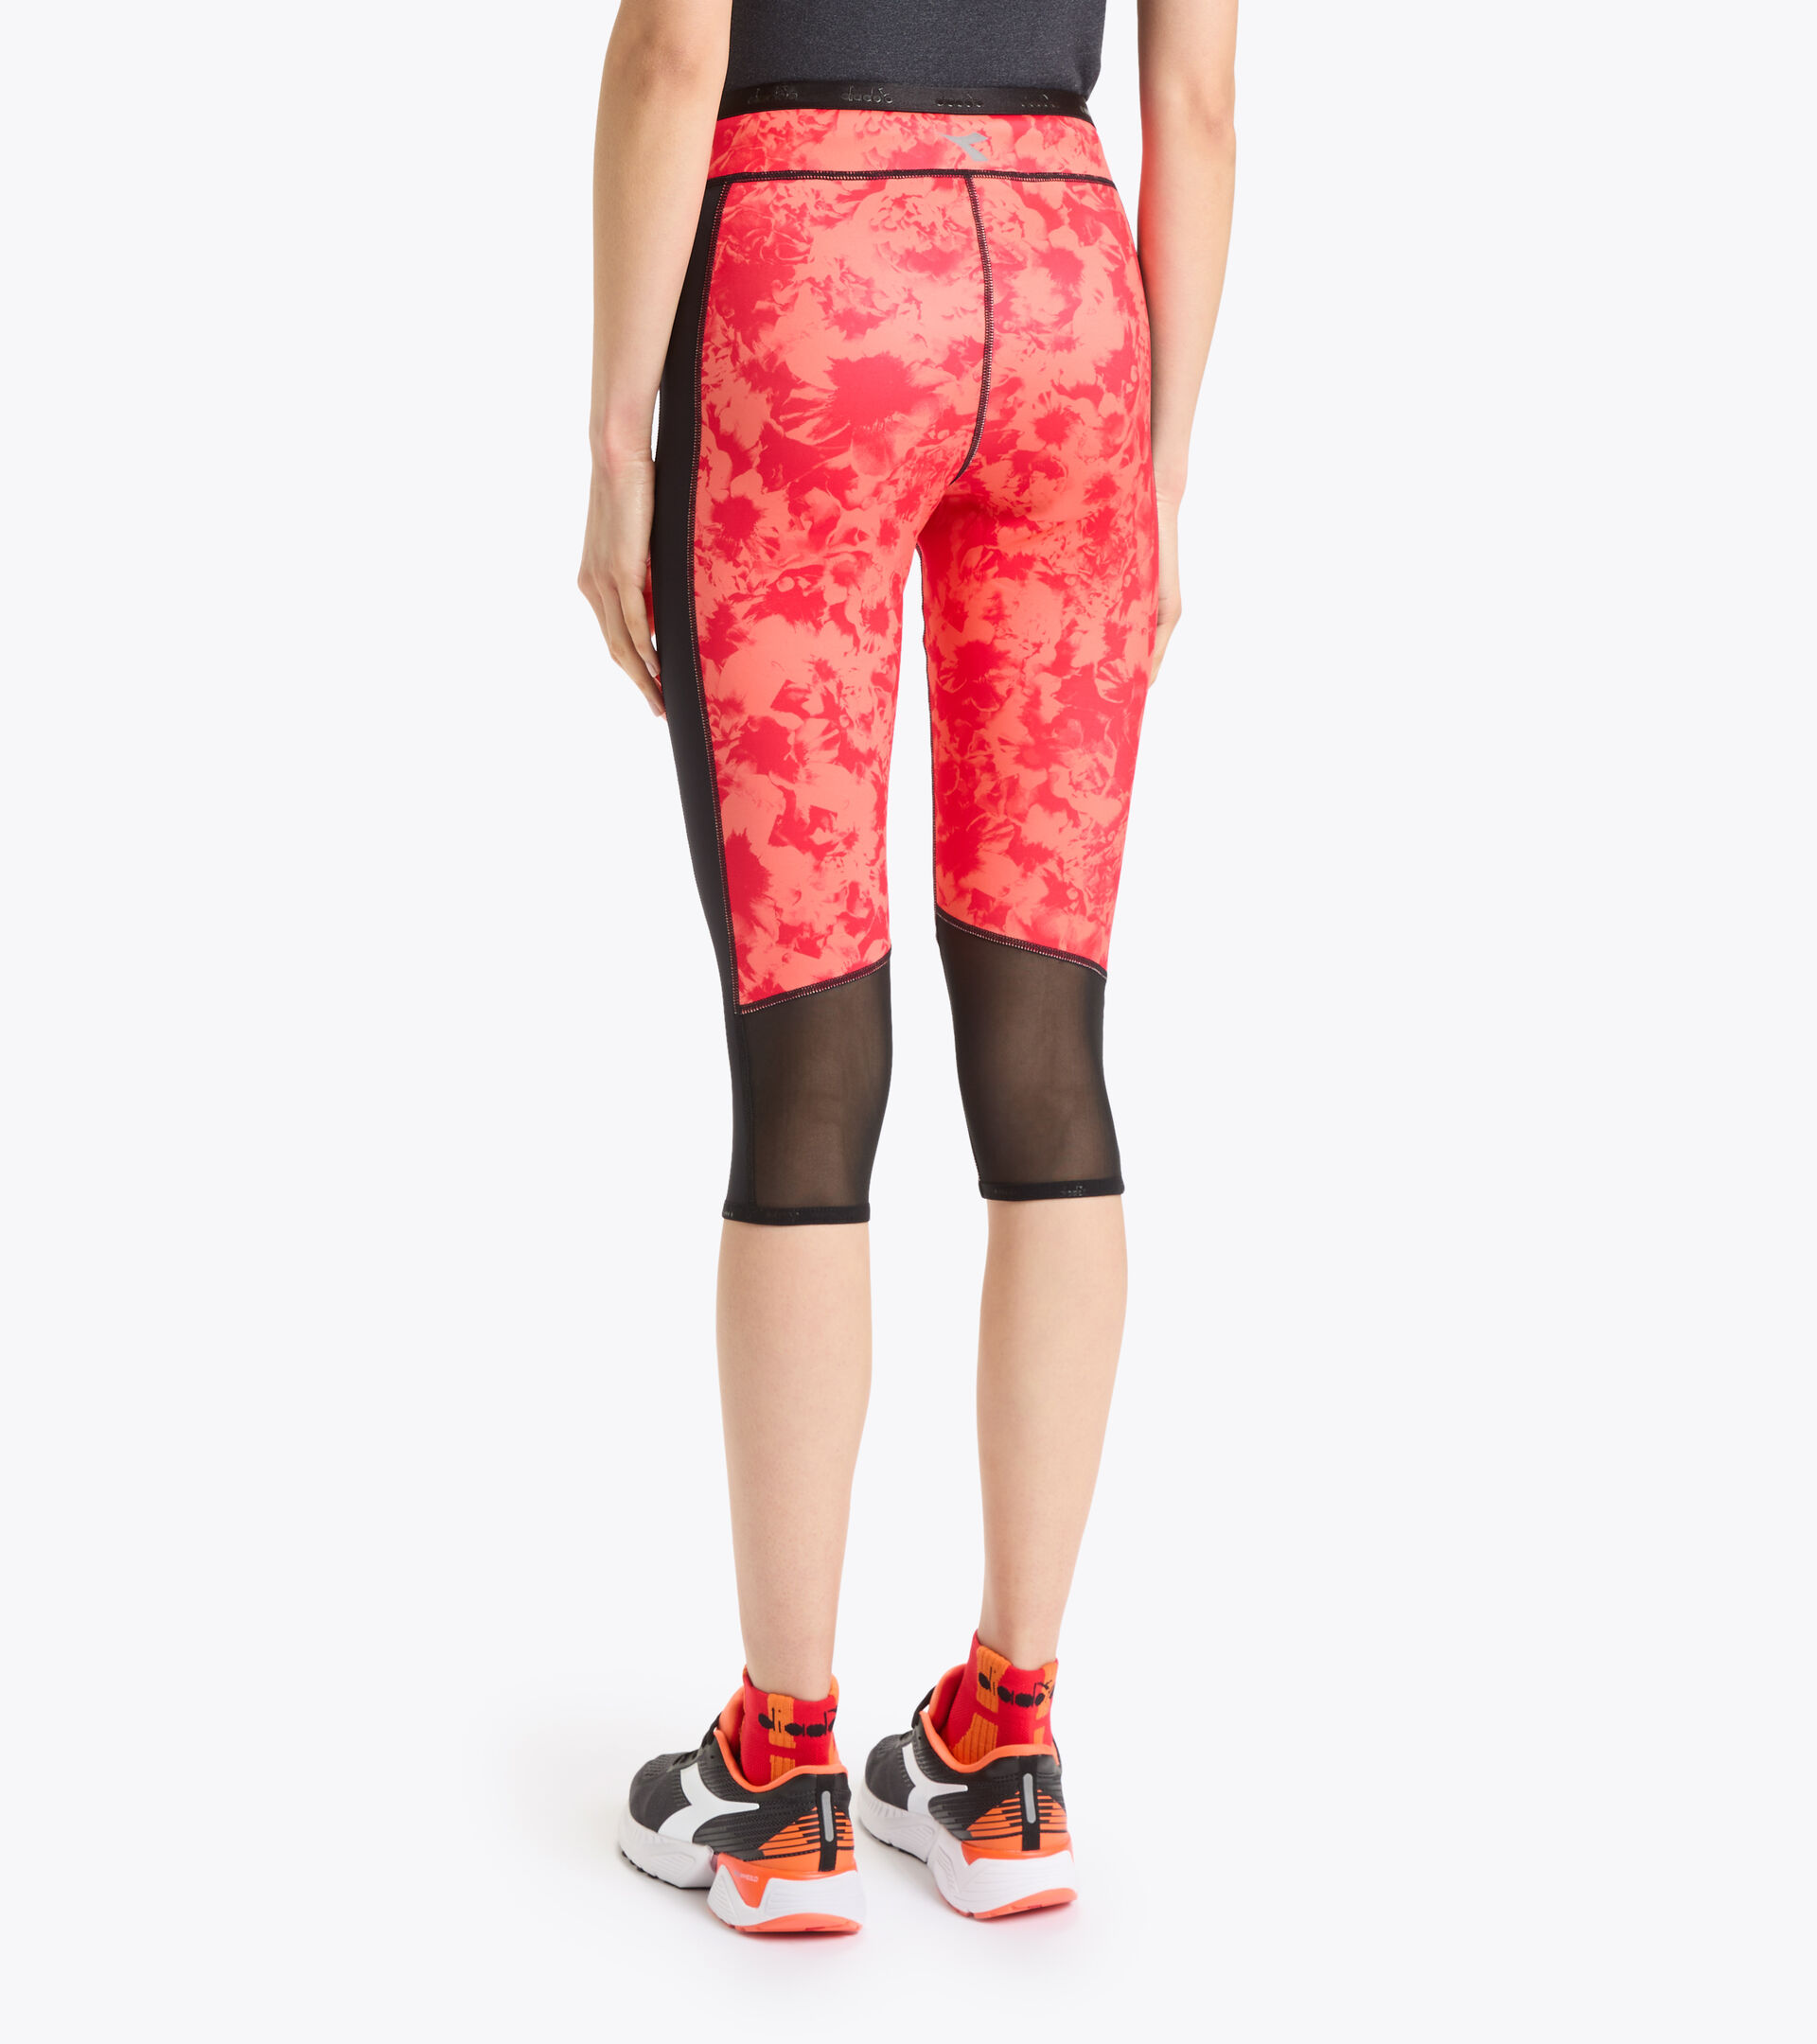 L. 3/4 REVERSIBLE TIGHTS BE ONE Double-face leggings - Women - Diadora  Online Store CA